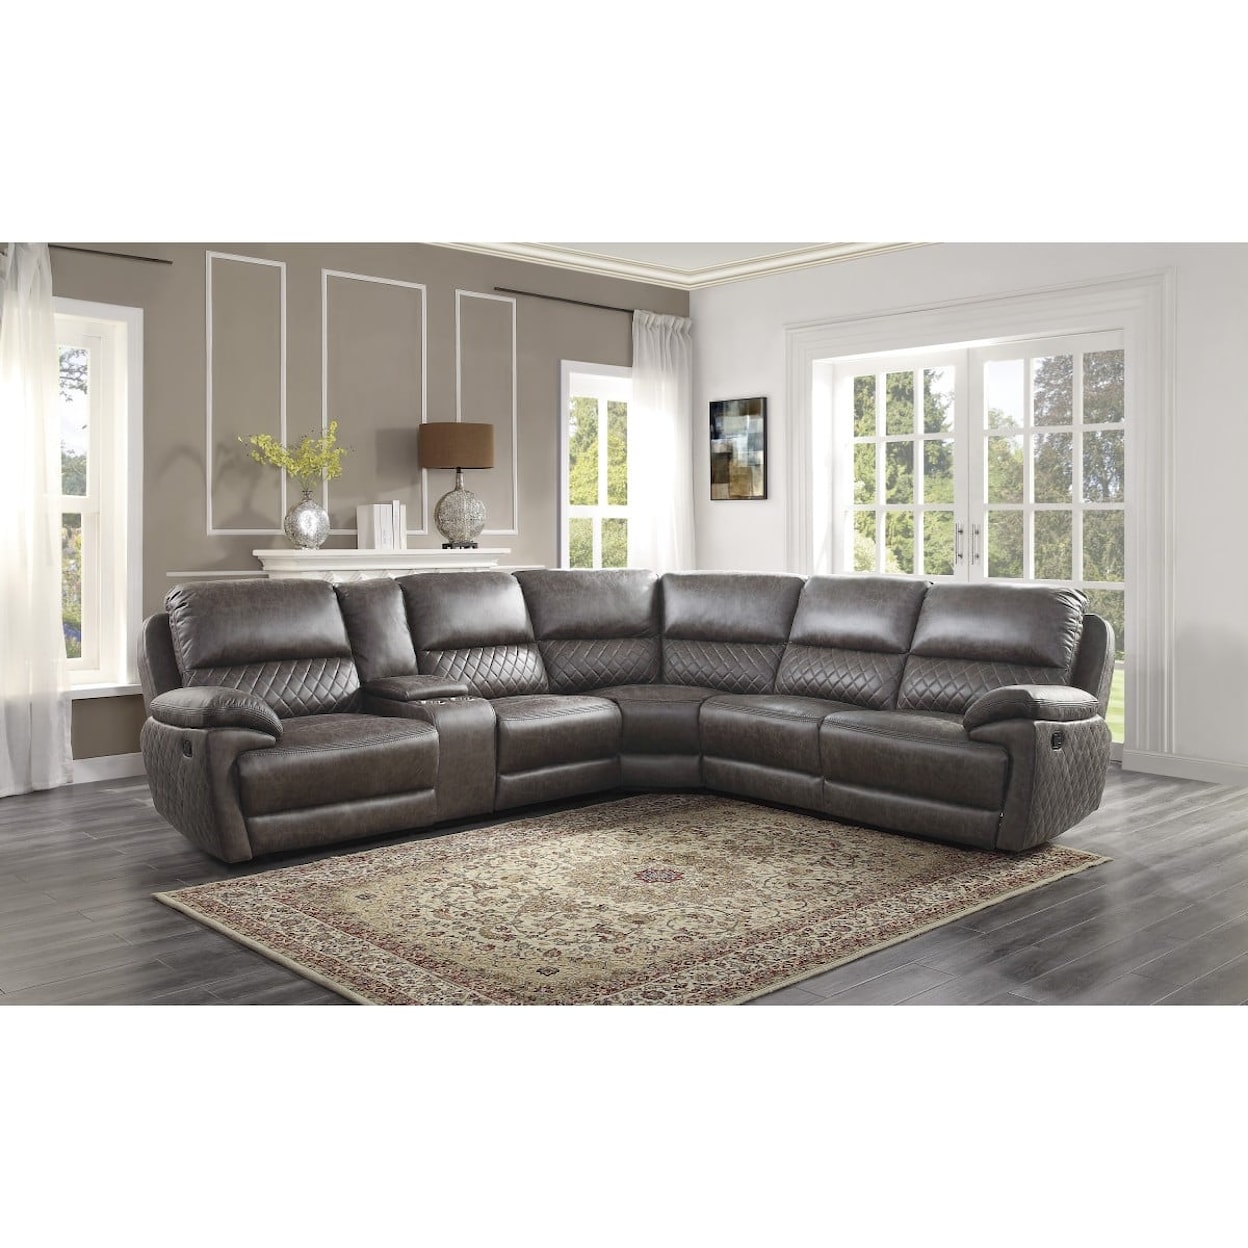 Homelegance Furniture Knoxville 3-Piece Reclining Sectional